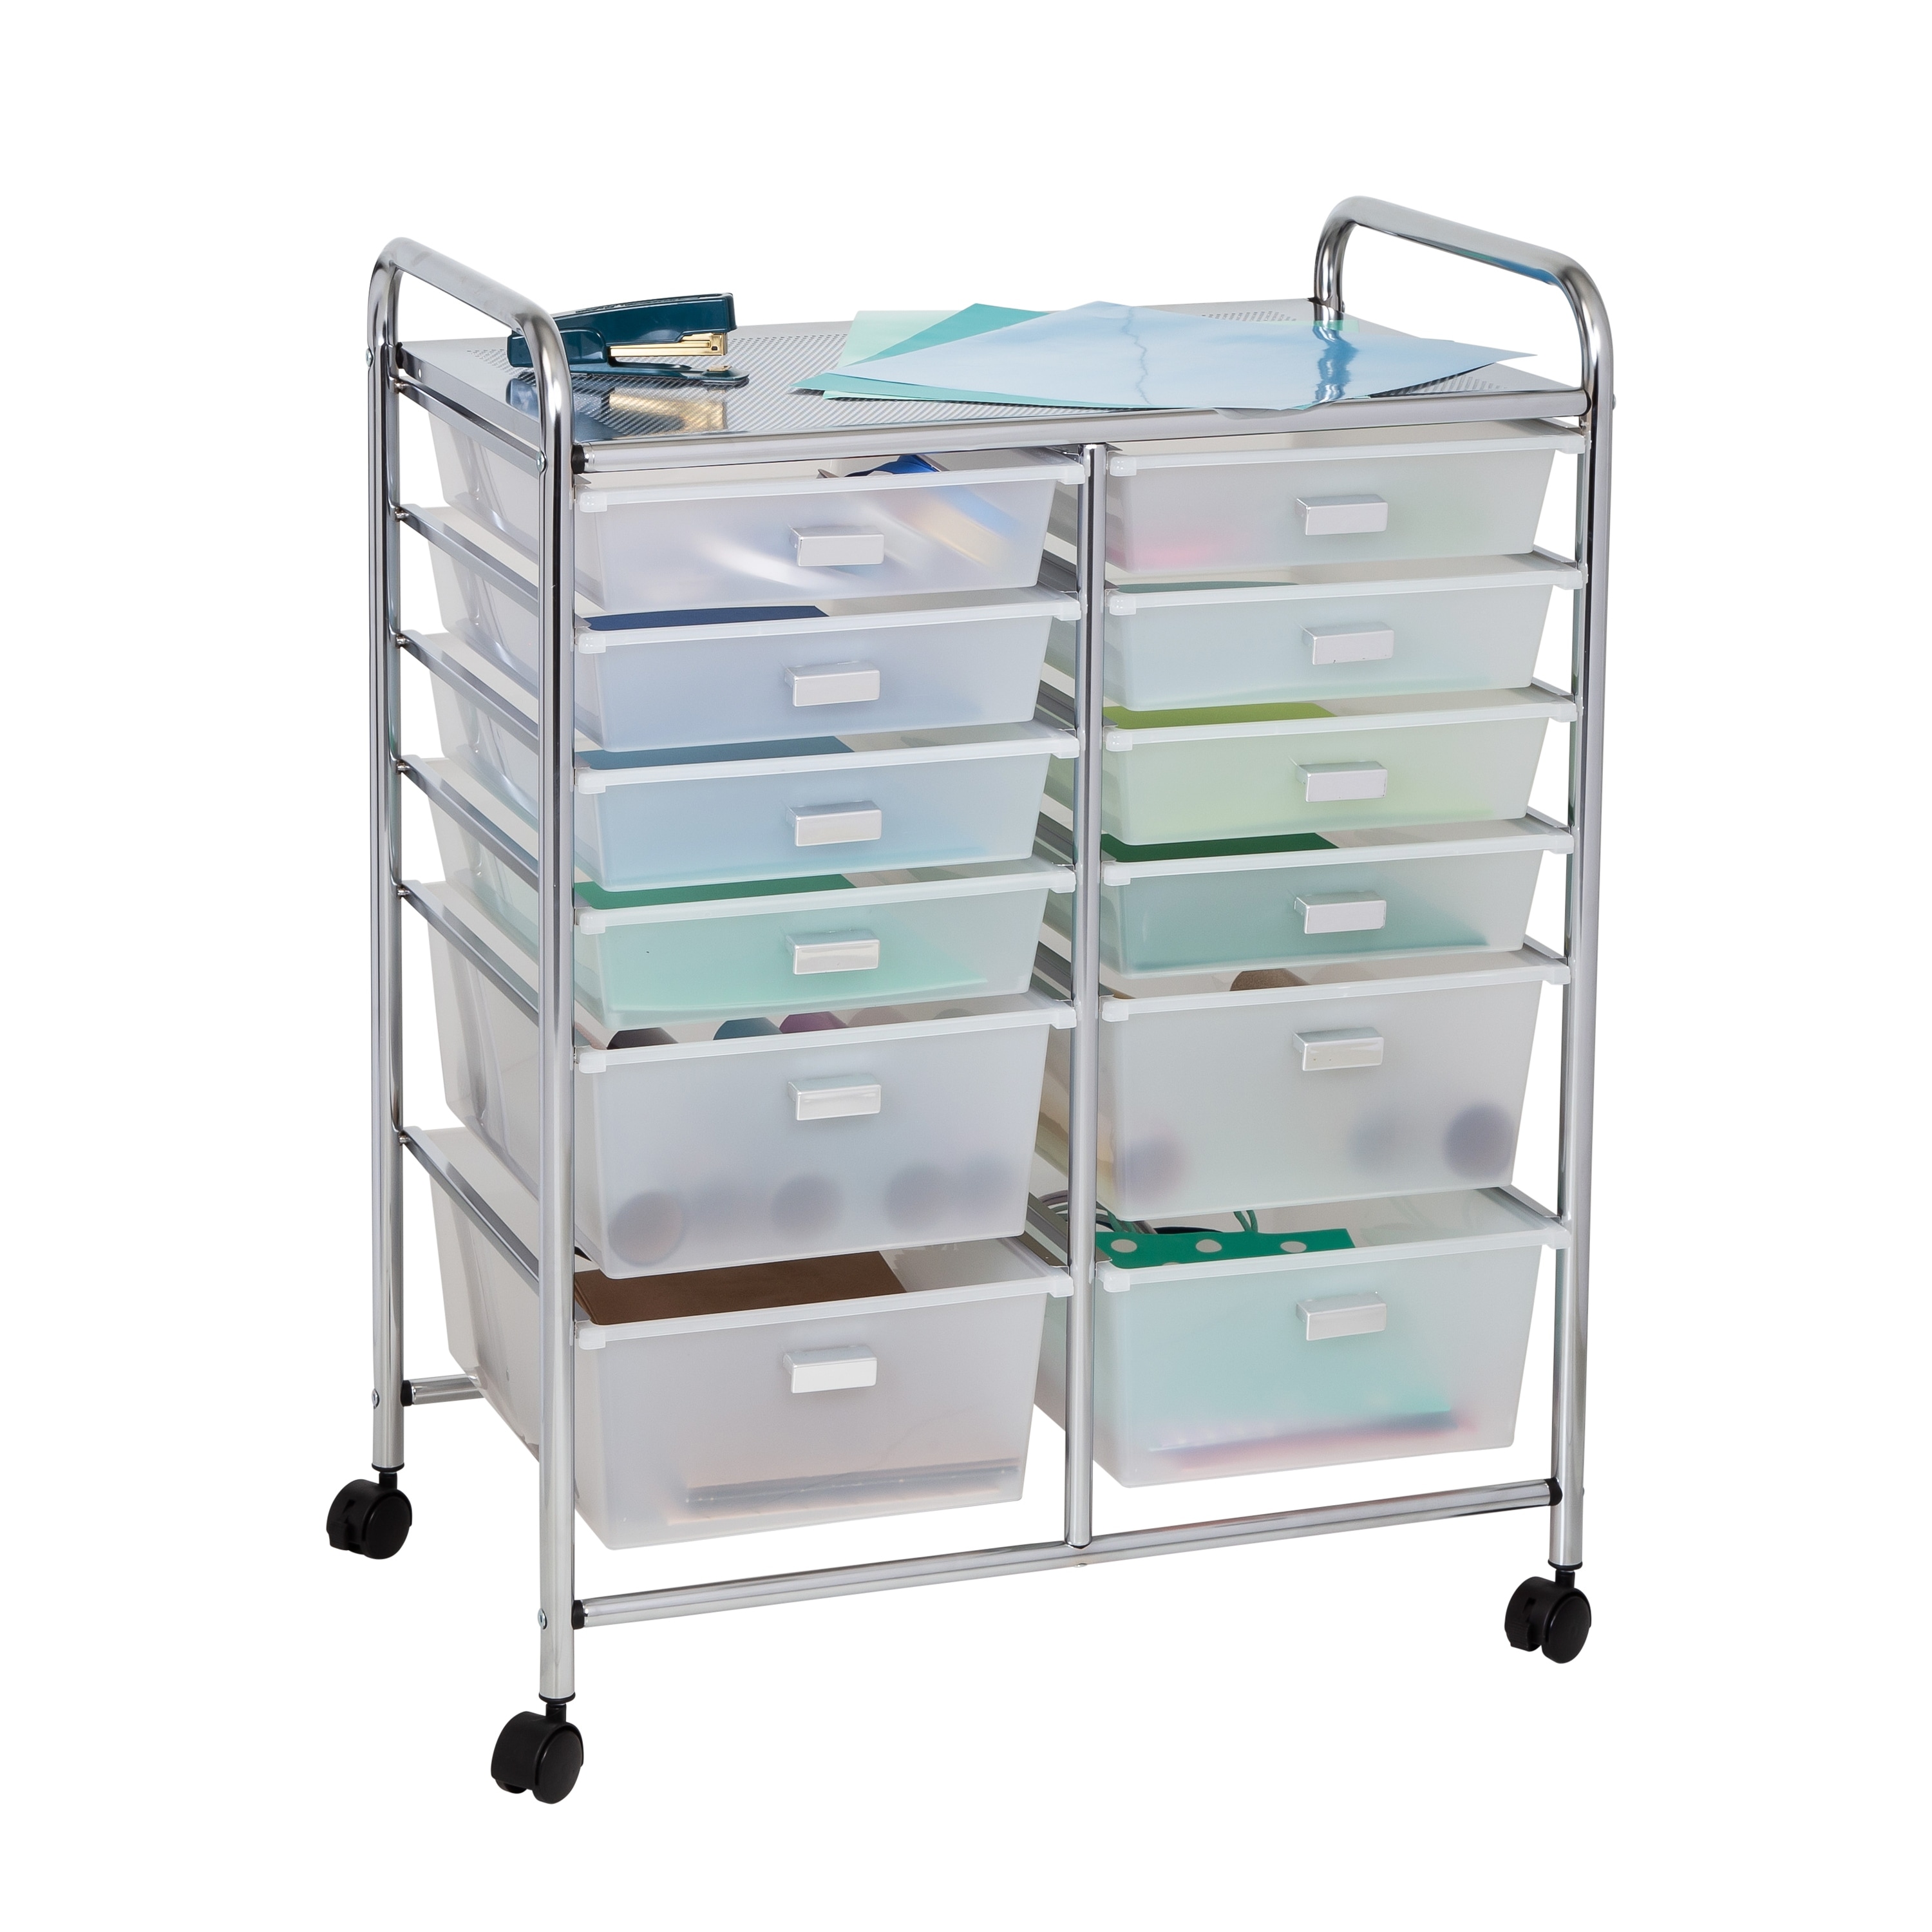 https://ak1.ostkcdn.com/images/products/is/images/direct/1a68761f7ef8eb51e5daa0d6230418baa7ec5f40/Chrome-Clear-12-Drawer-Office-or-Craft-Storage-Cart.jpg